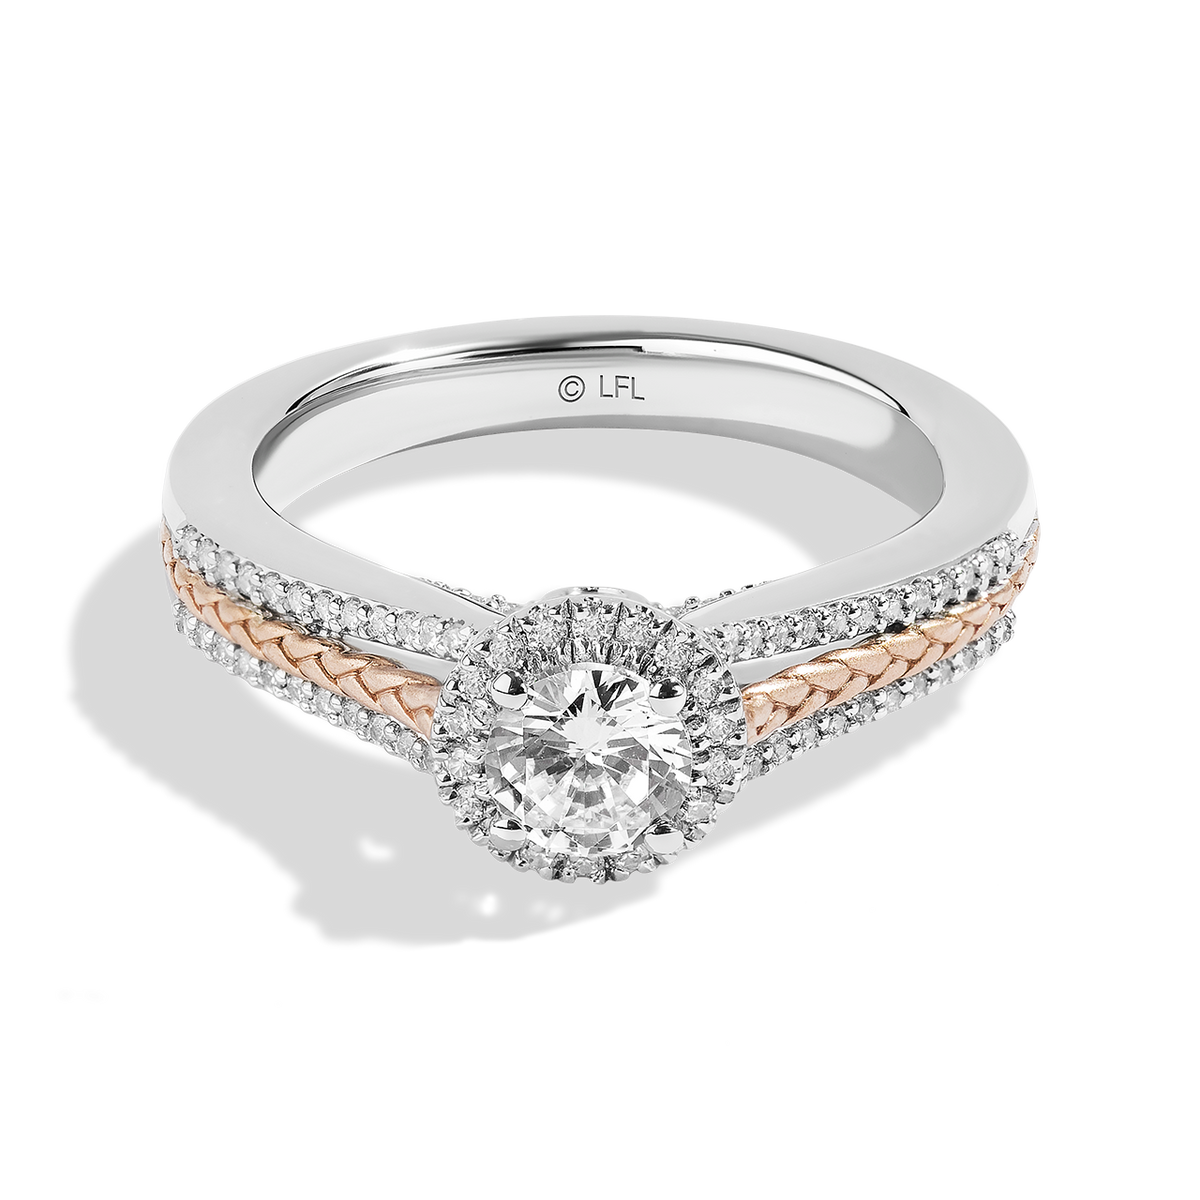 Luminary Solitaire Engagement Ring | Shane Co.